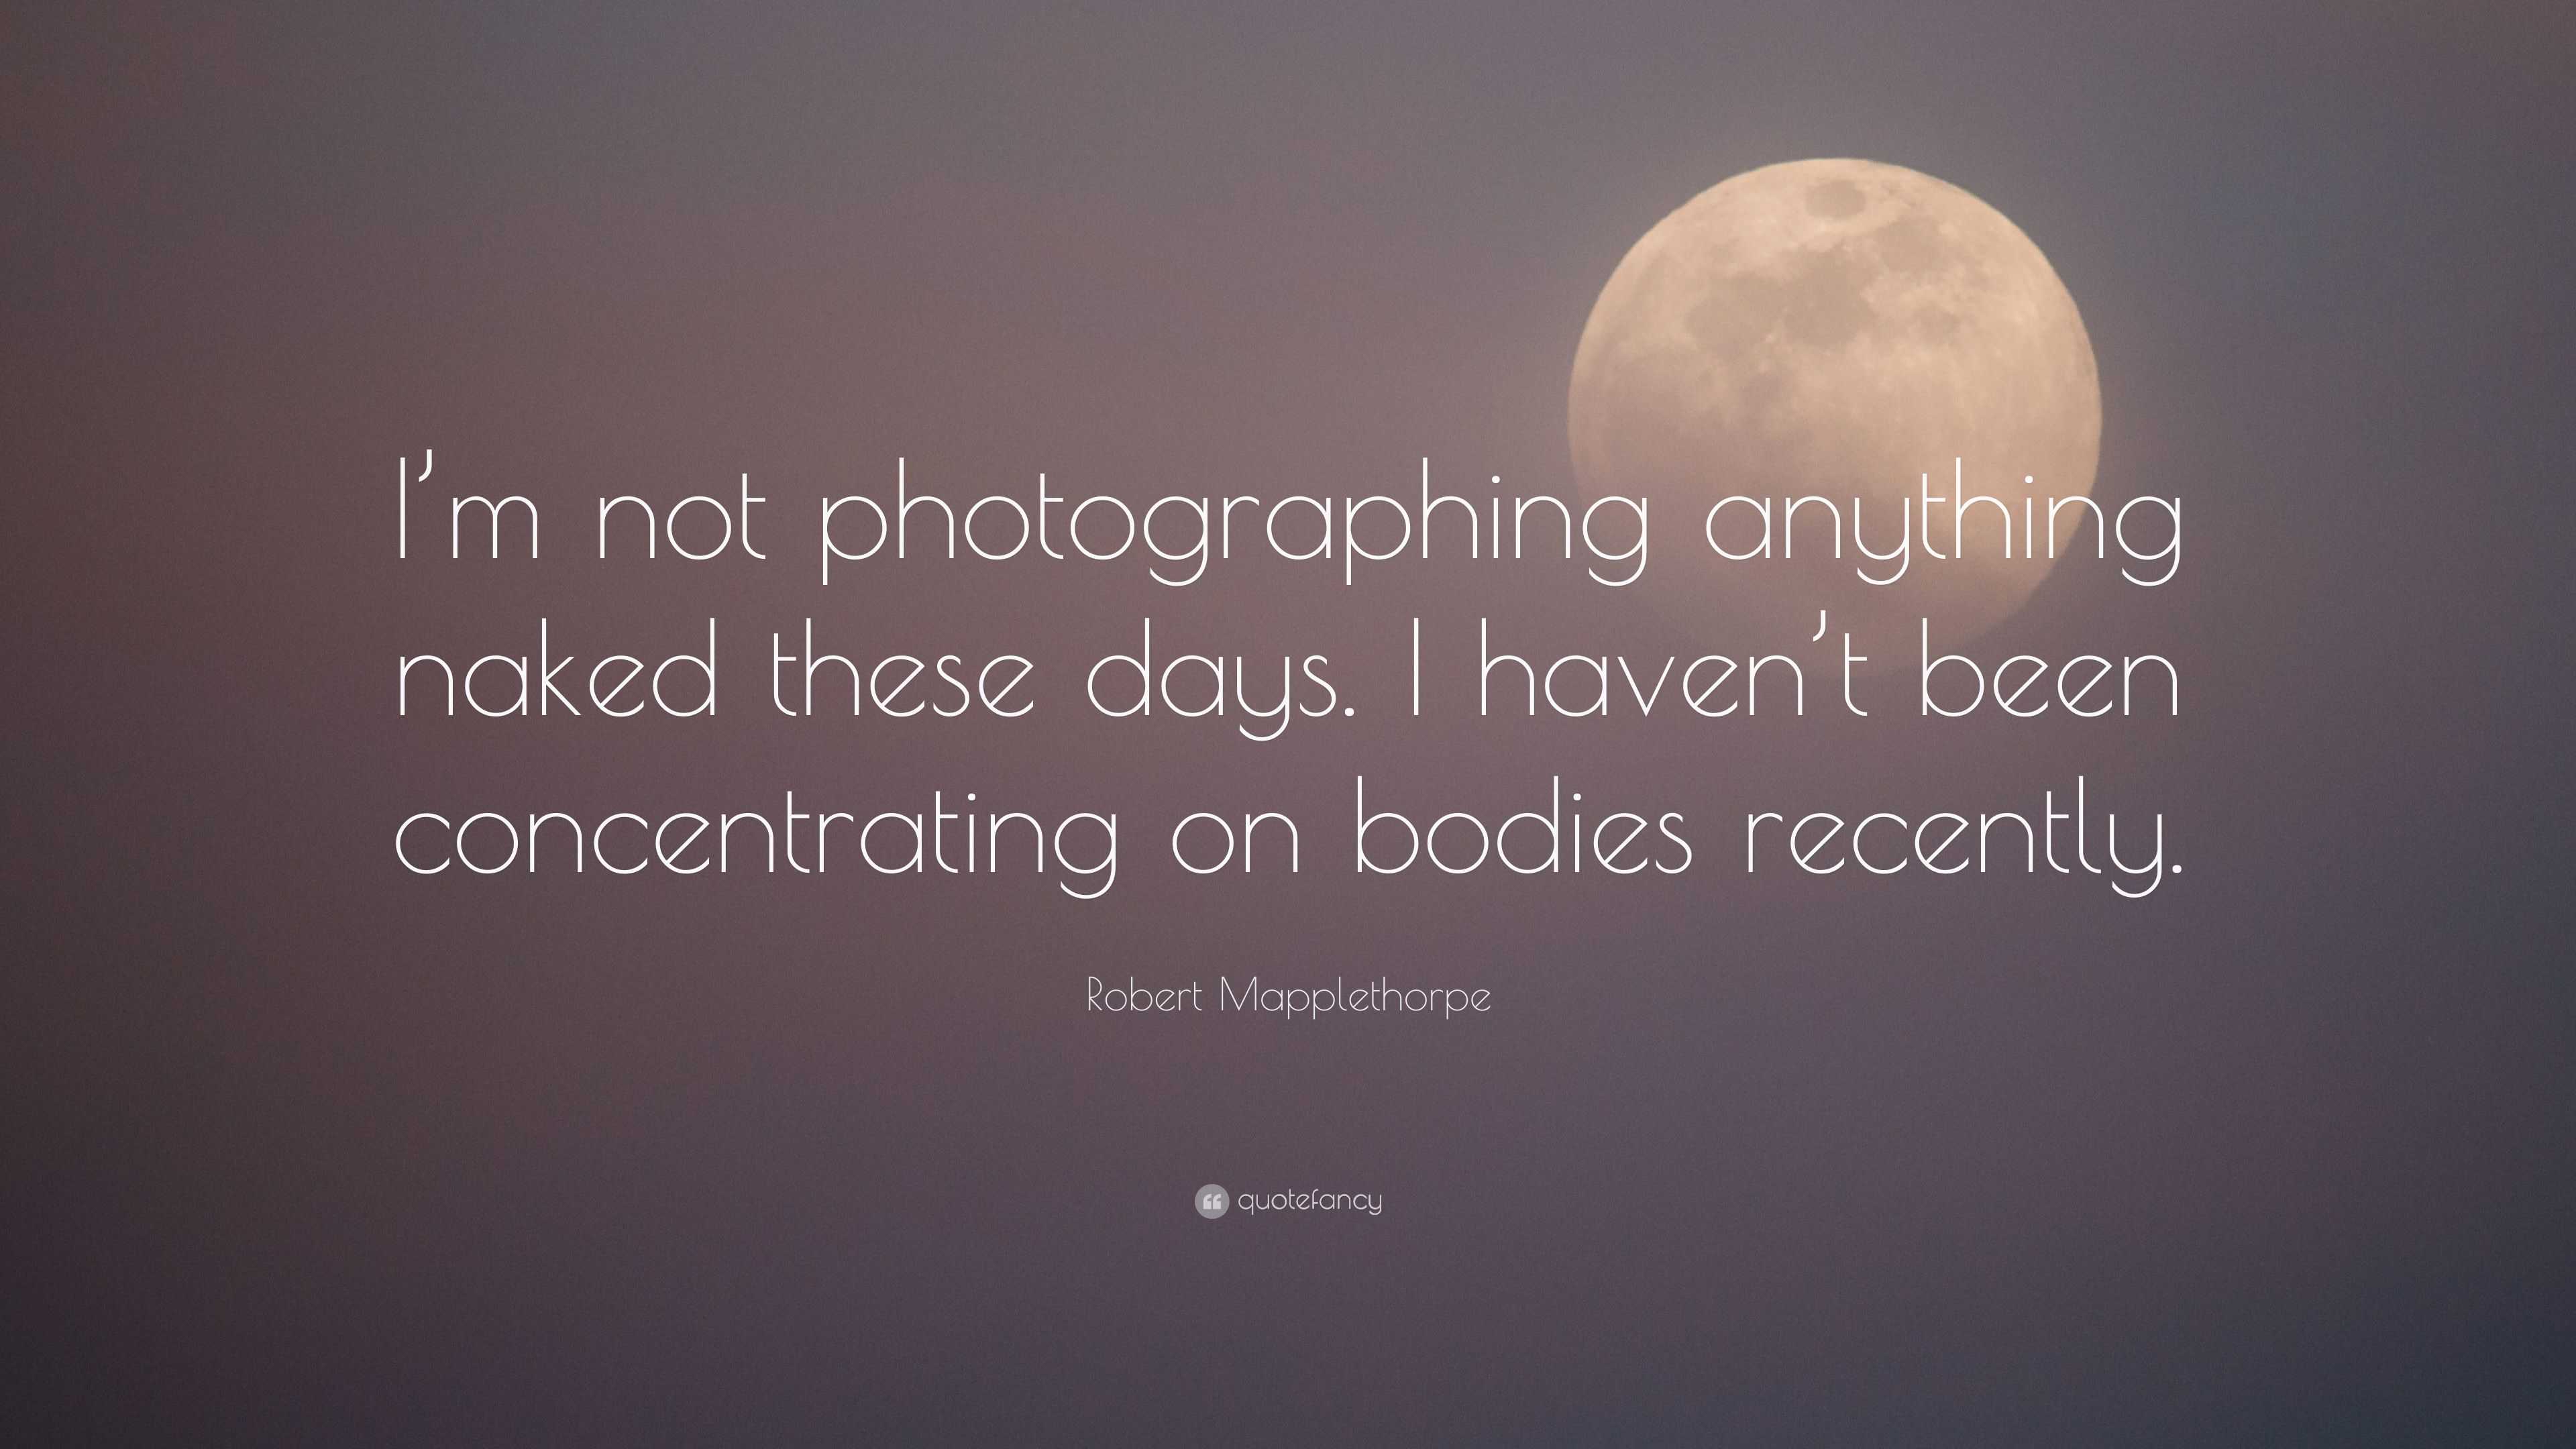 Robert Mapplethorpe Quote Im Not Photographing Anything Naked These Days I Havent Been